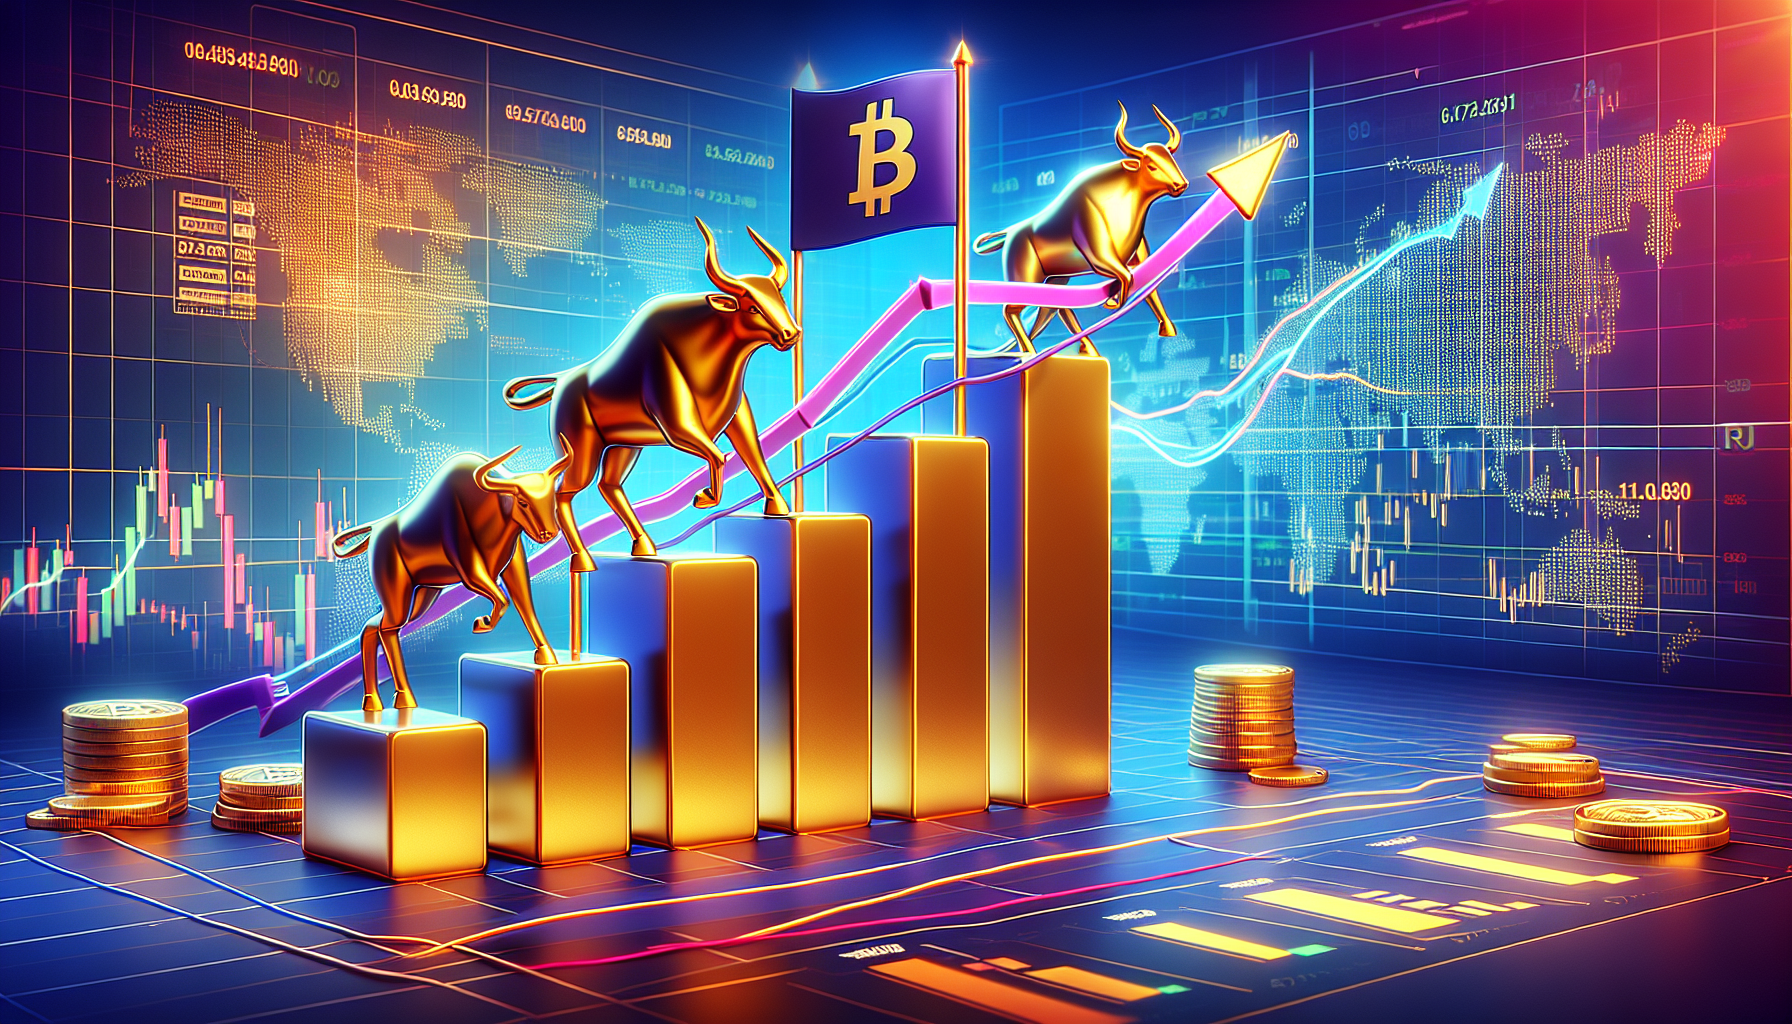 Analyzing bitcoin's bull flag formation and MACD indicators for investment opportunities